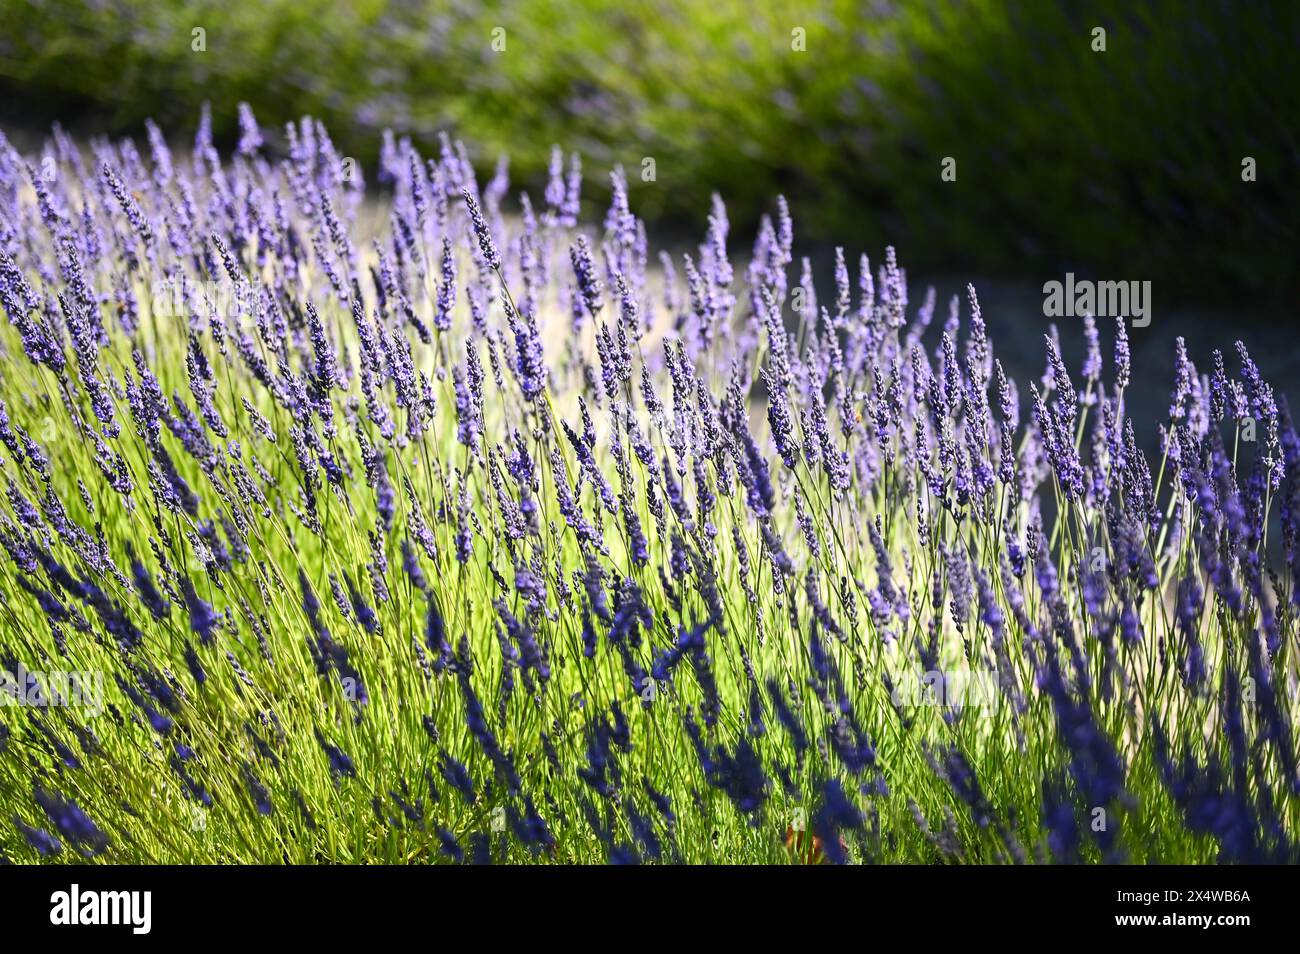 Just a bunch of lavender hanging around Stock Photo